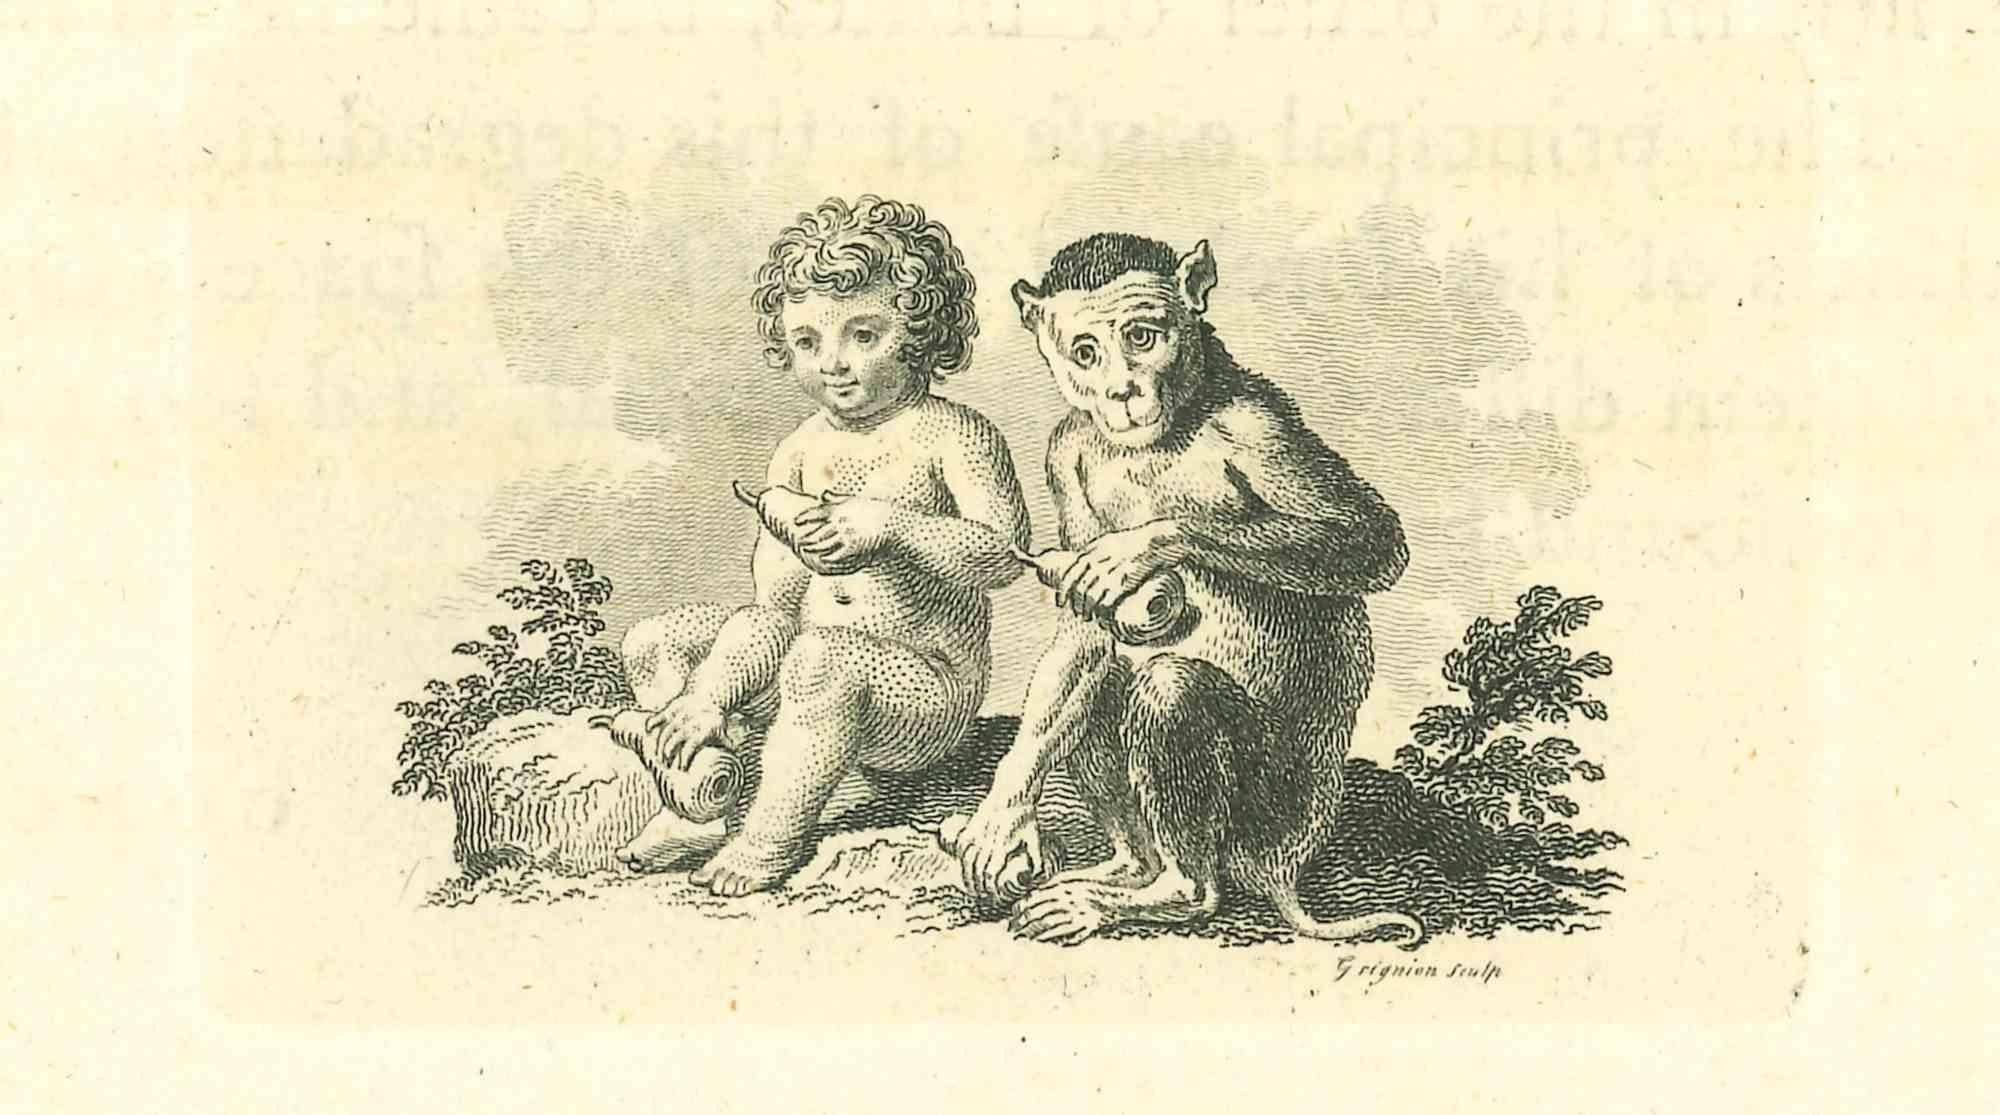 The Child and the Monkey - Original Etching by Thomas Holloway - 1810